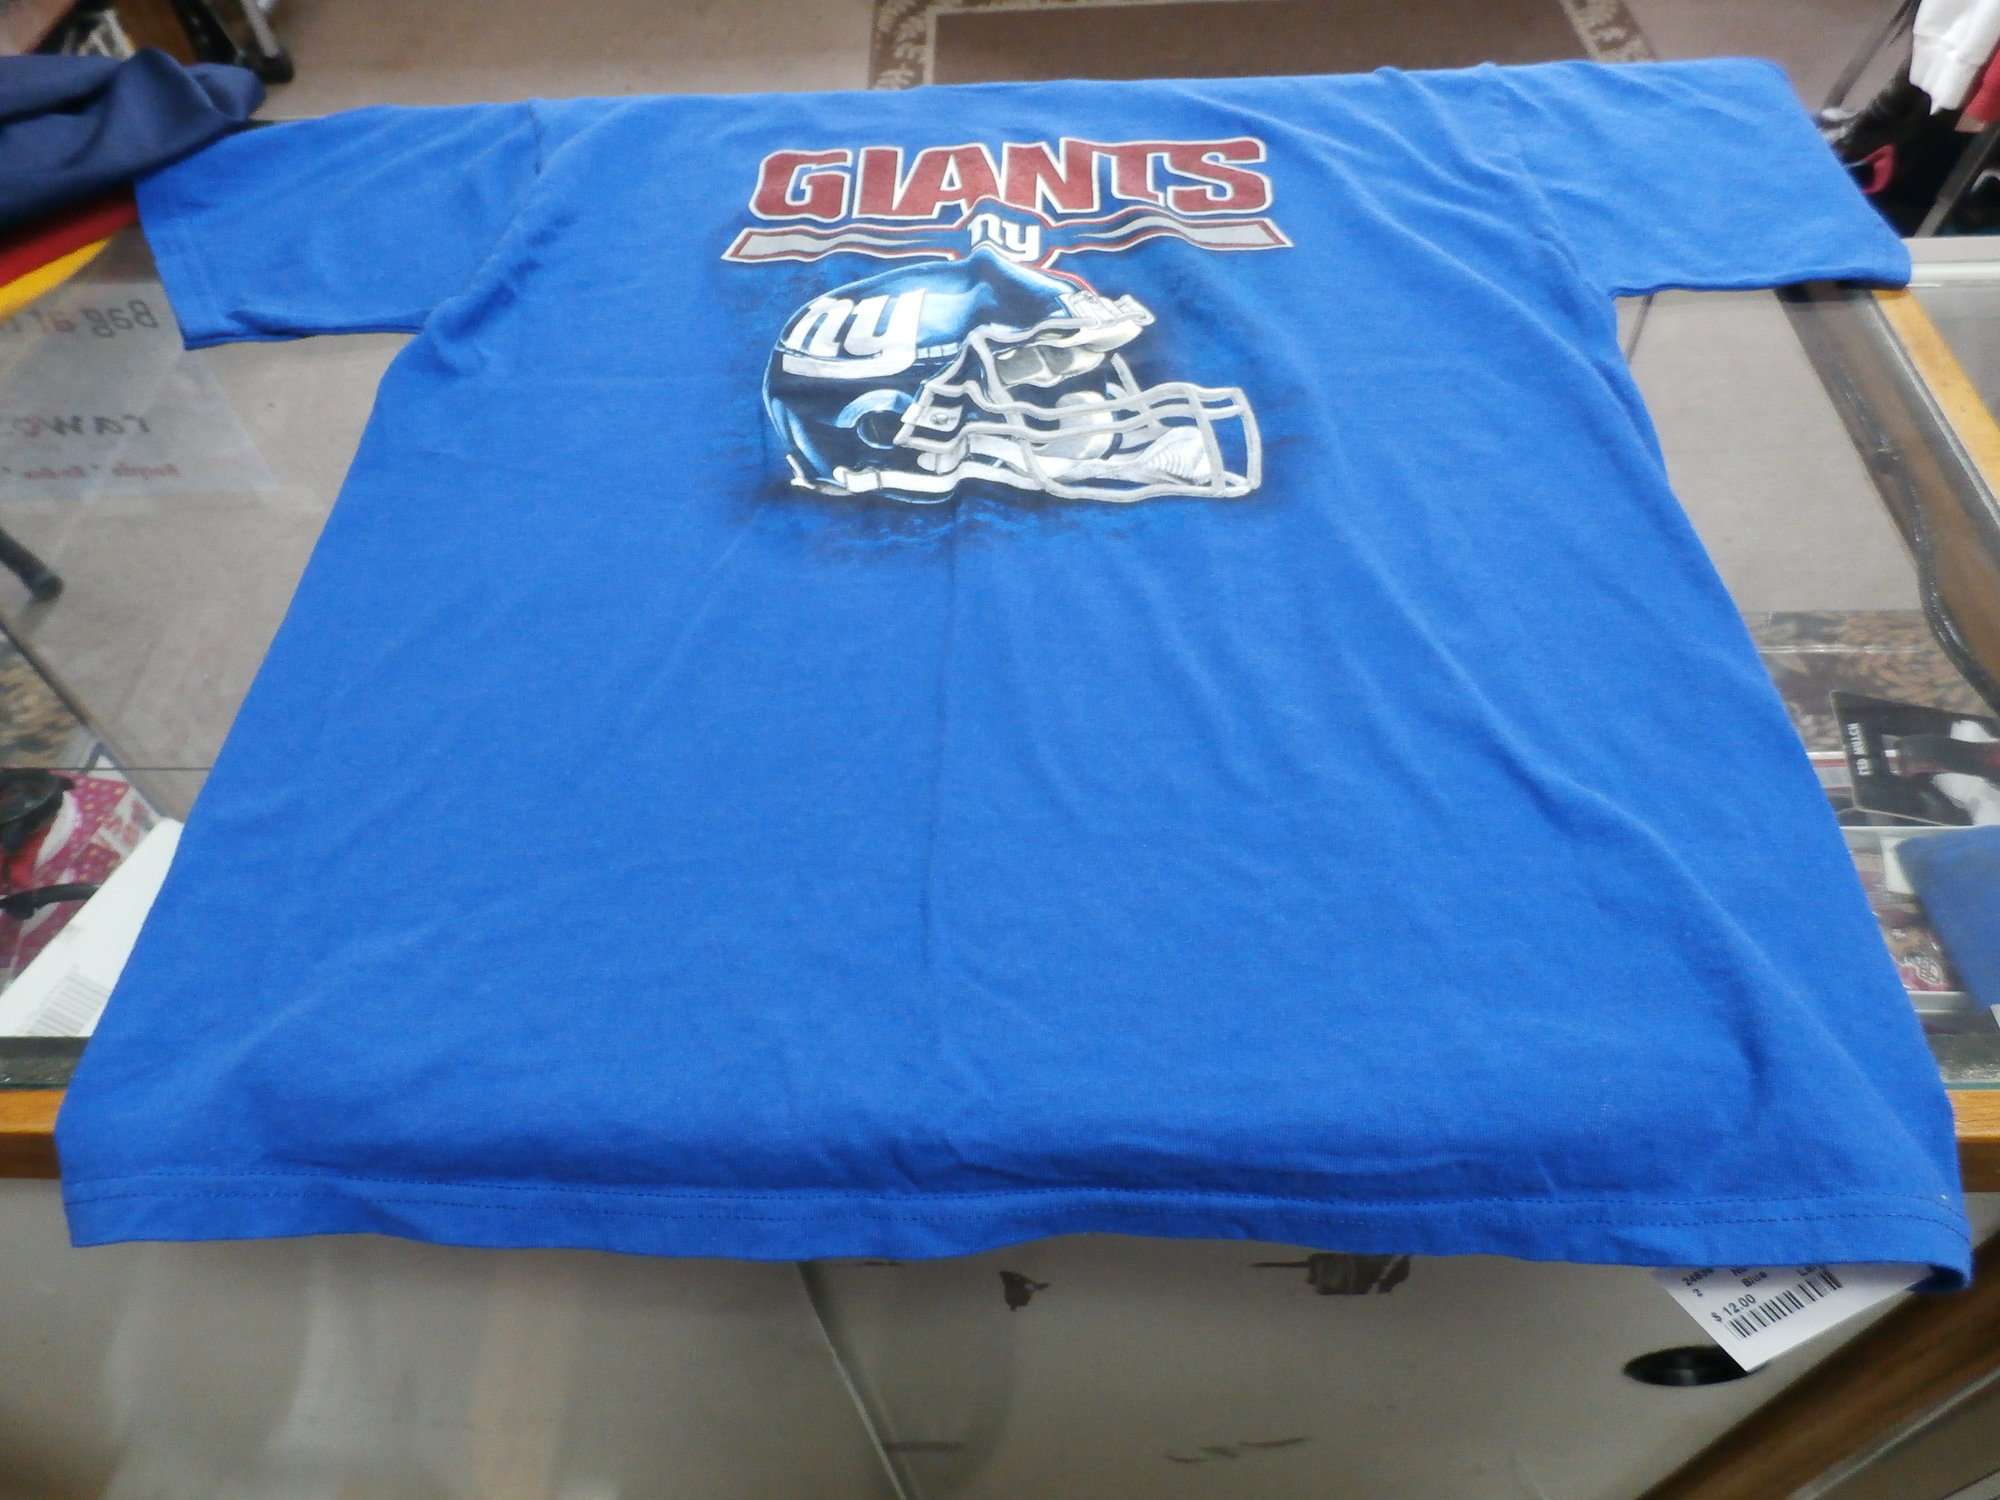 New York Giants - Jersey Teams Store